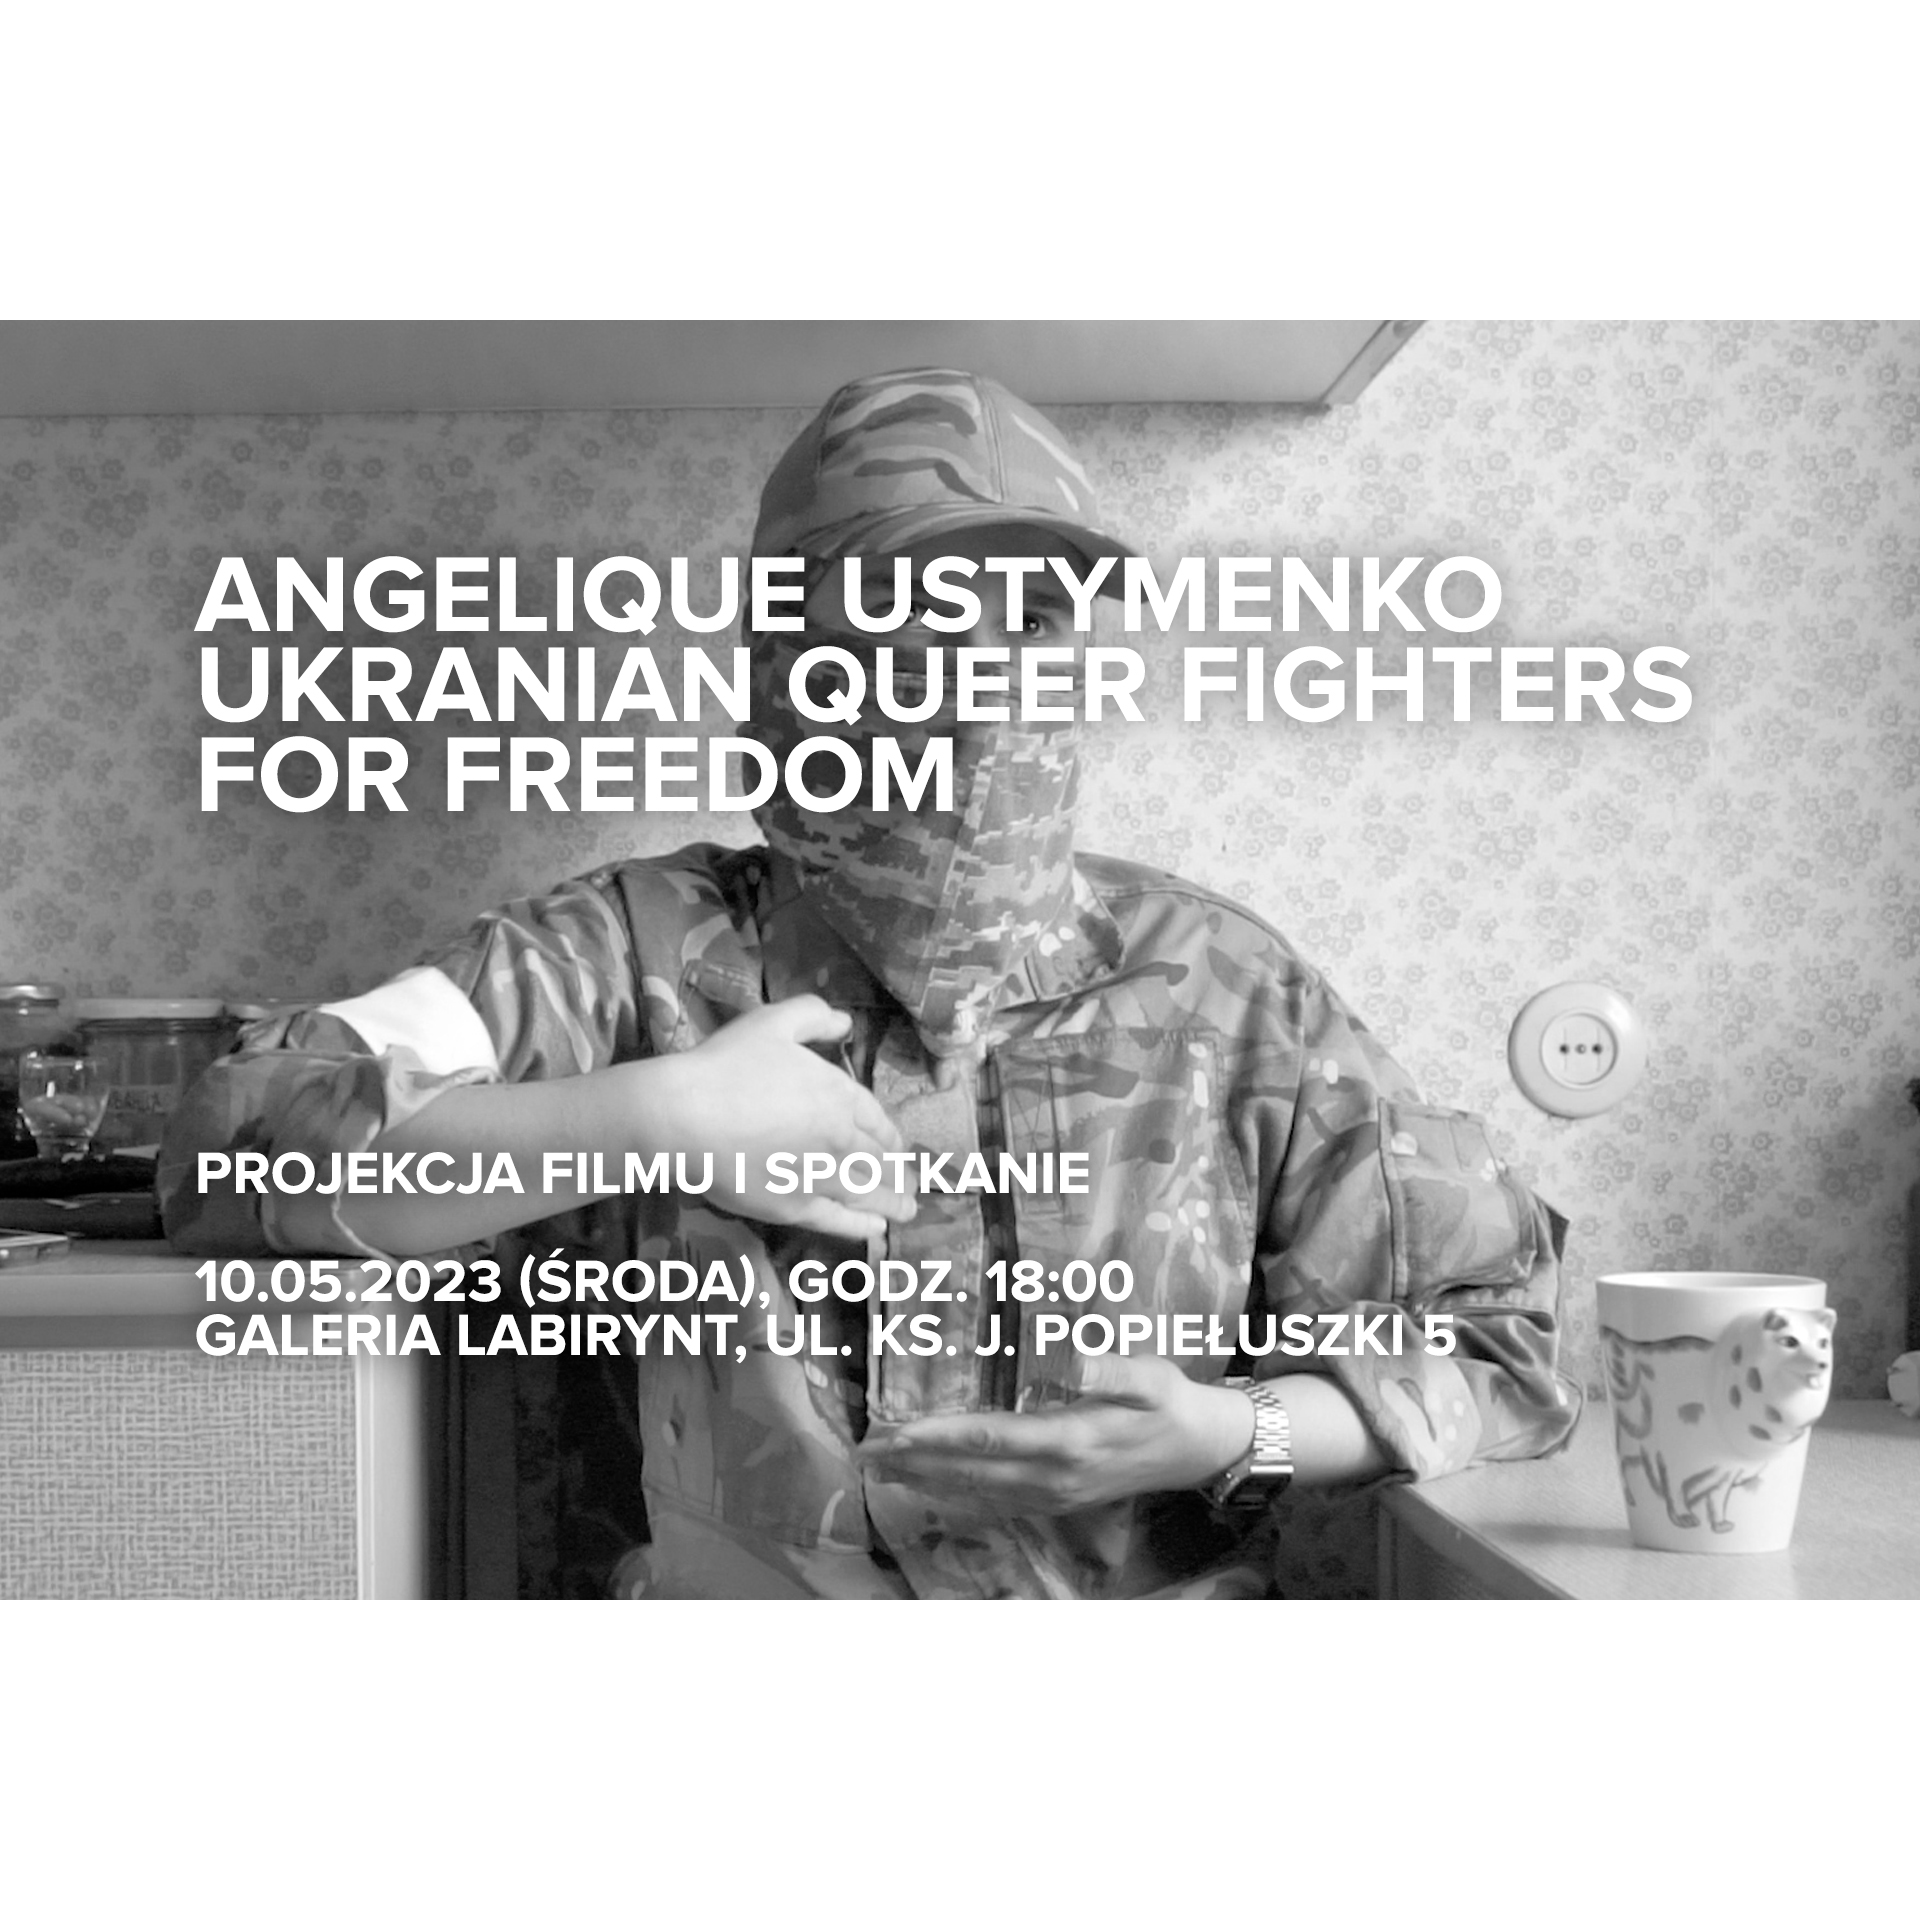 Angelique Ustymenko “Ukrainian Queer Fighters for Freedom” – film screening and Q&A